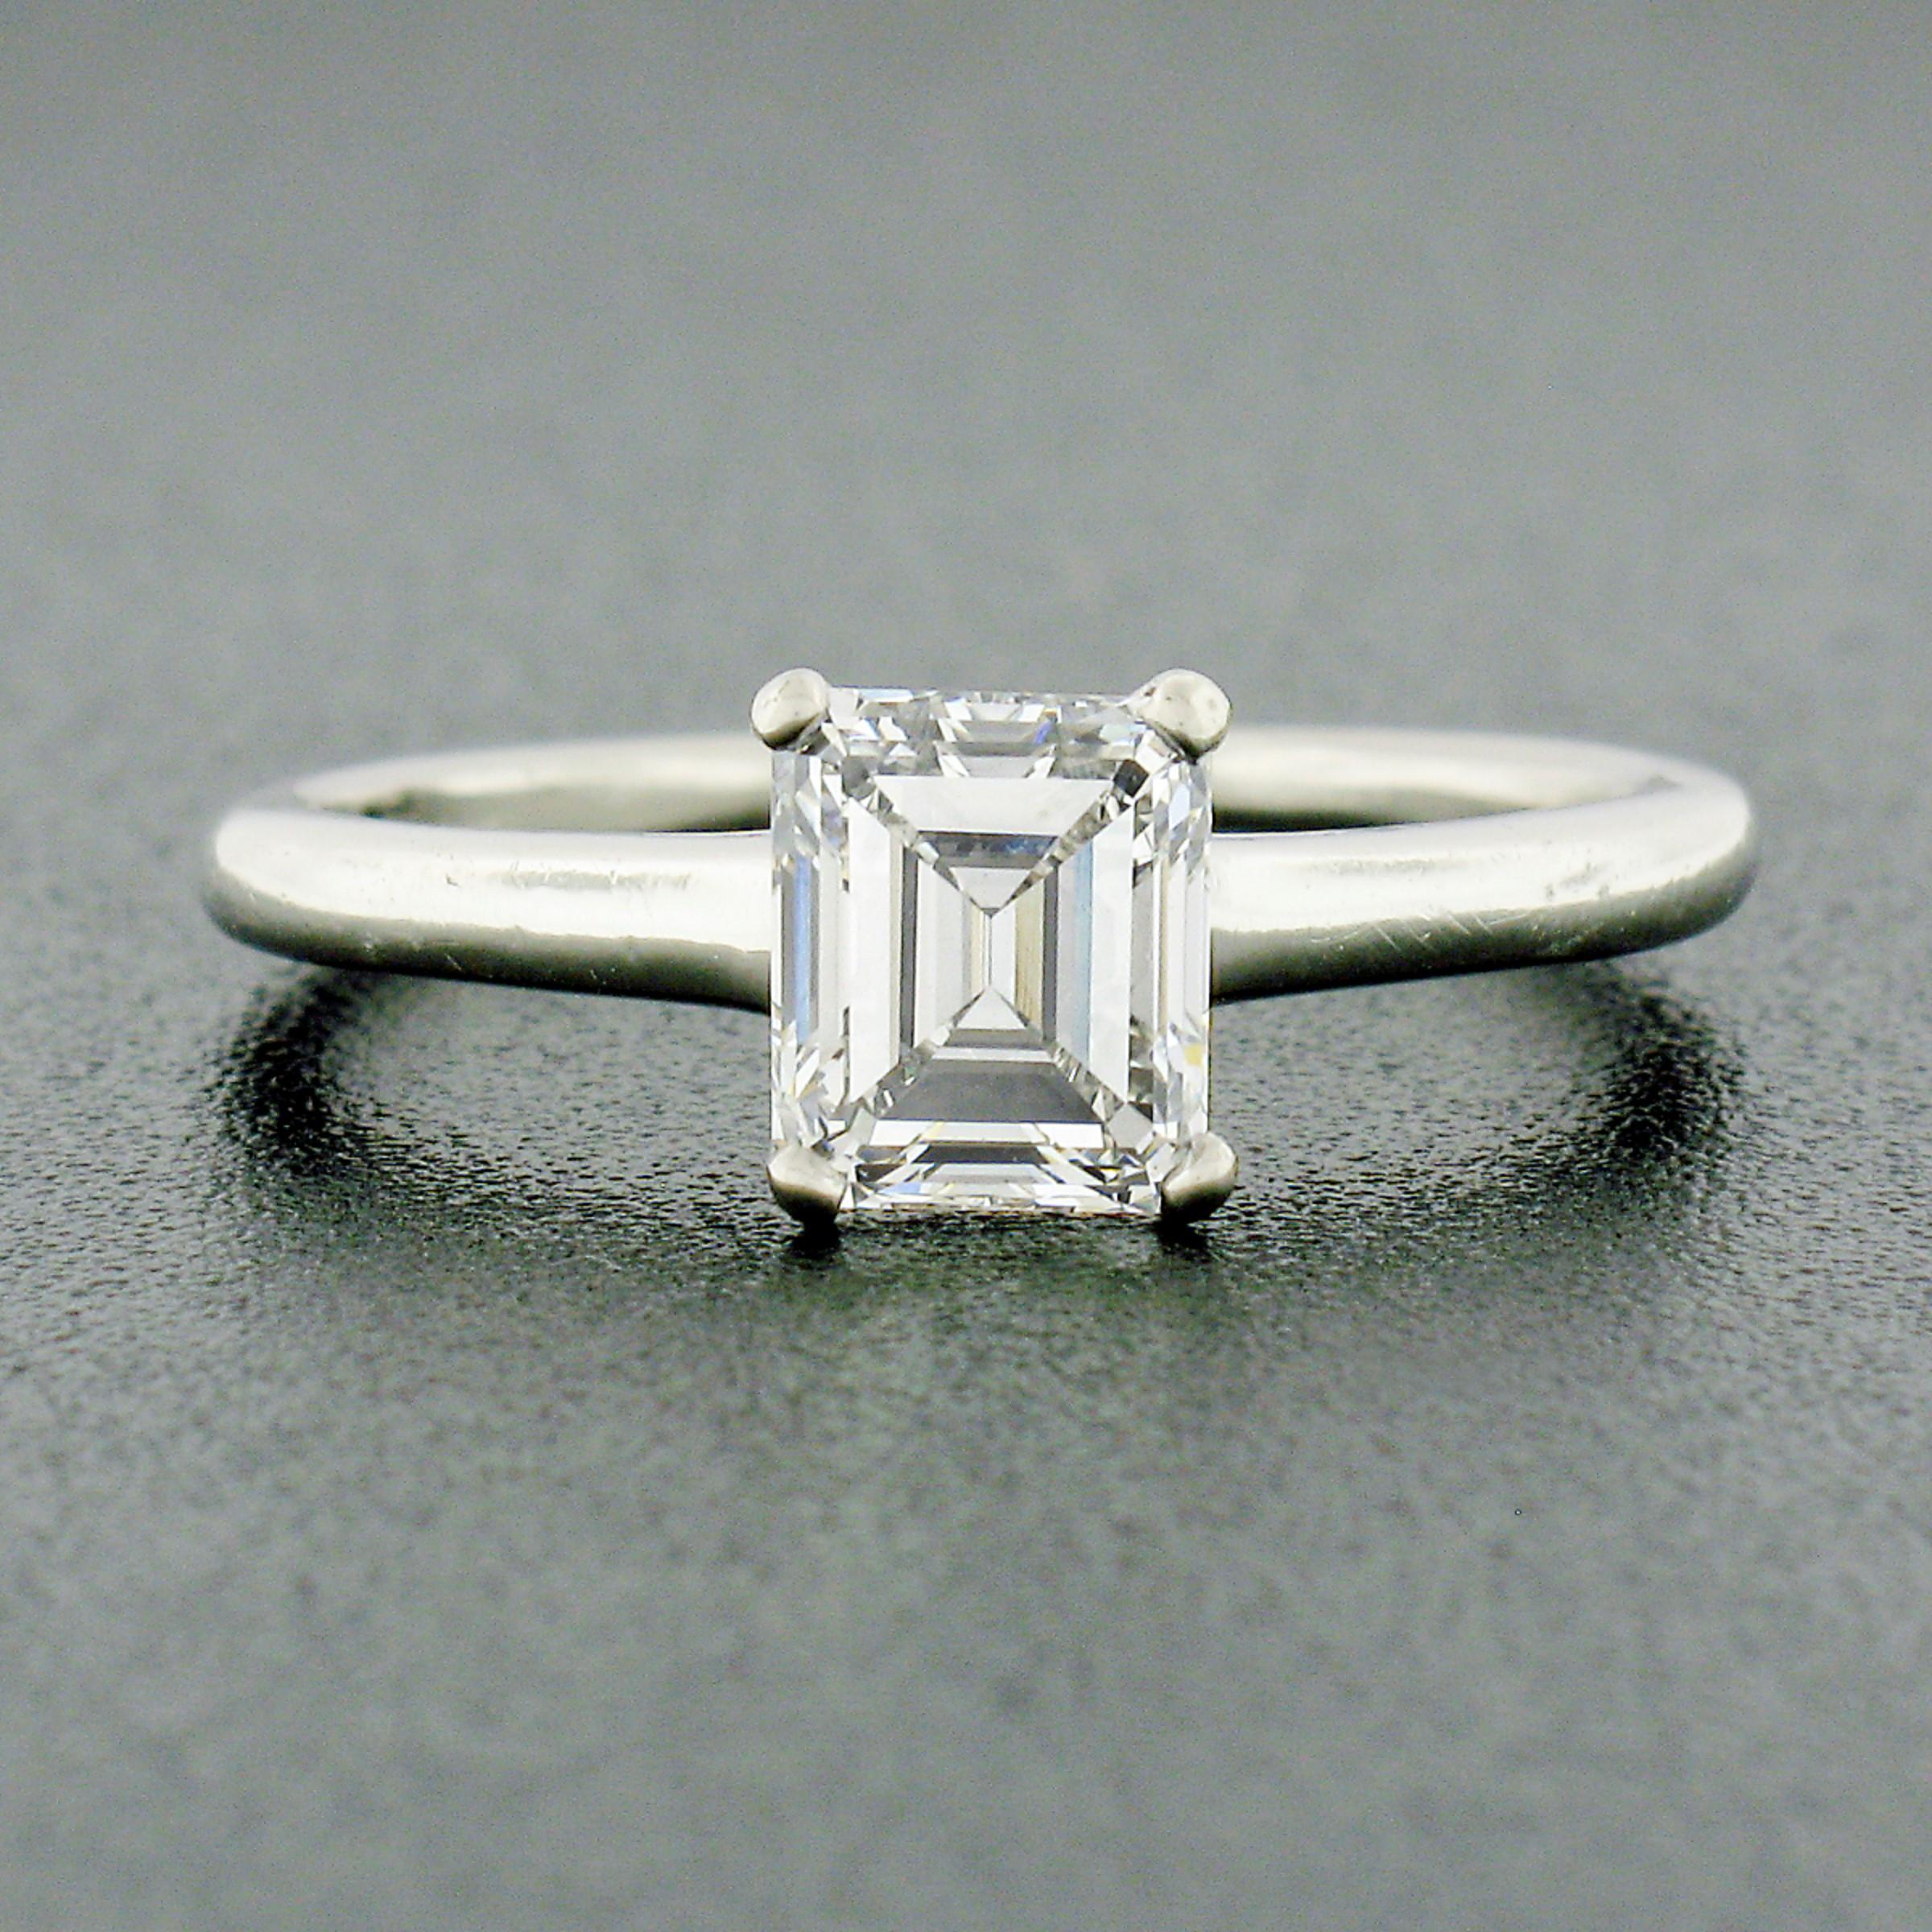 Here we have a classic, vintage, Tiffany & Co. diamond solitaire engagement ring that was crafted from solid platinum. It features a very fine quality, GIA certified, emerald cut diamond weighing exactly 1.06 carats and displays truly magnificent